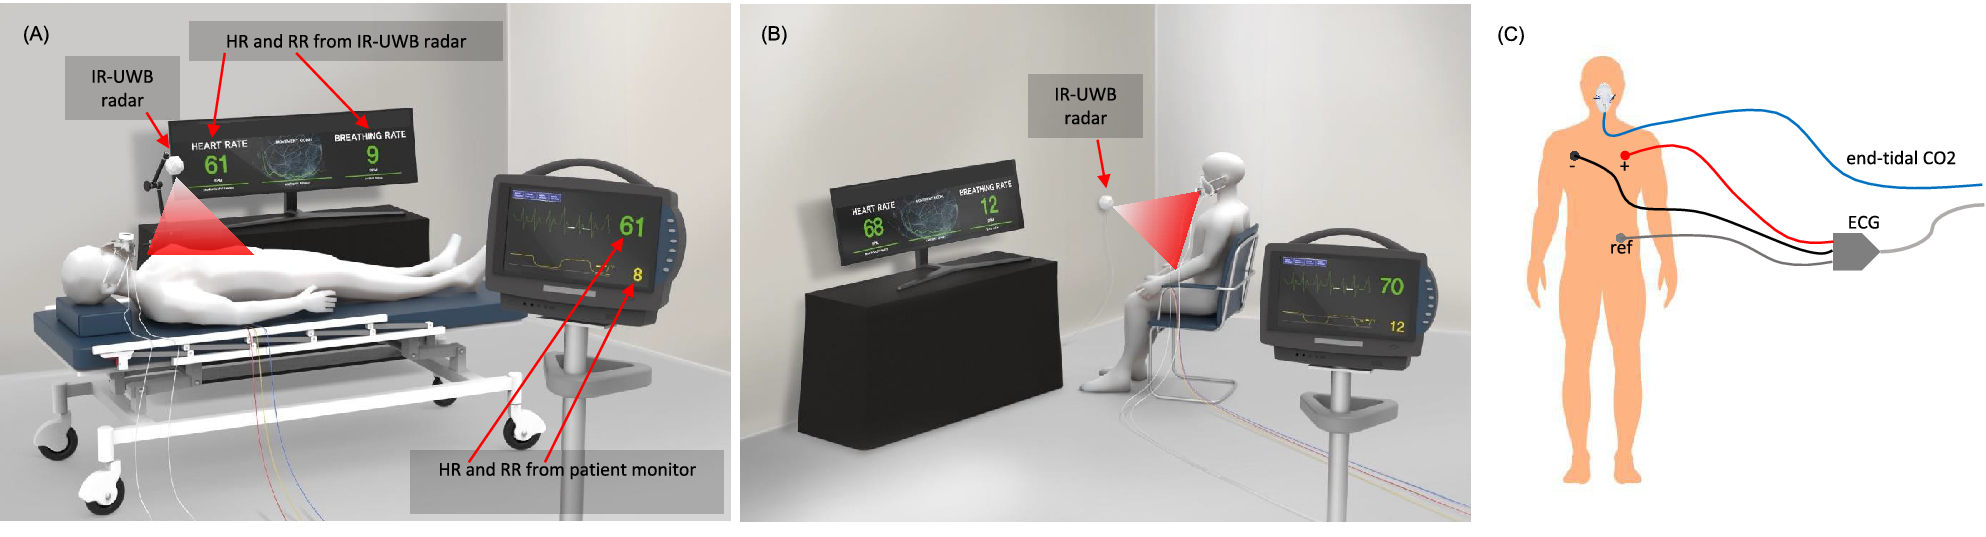 Preclinical evaluation of noncontact vital signs monitoring using real-time  IR-UWB radar and factors affecting its accuracy | Scientific Reports